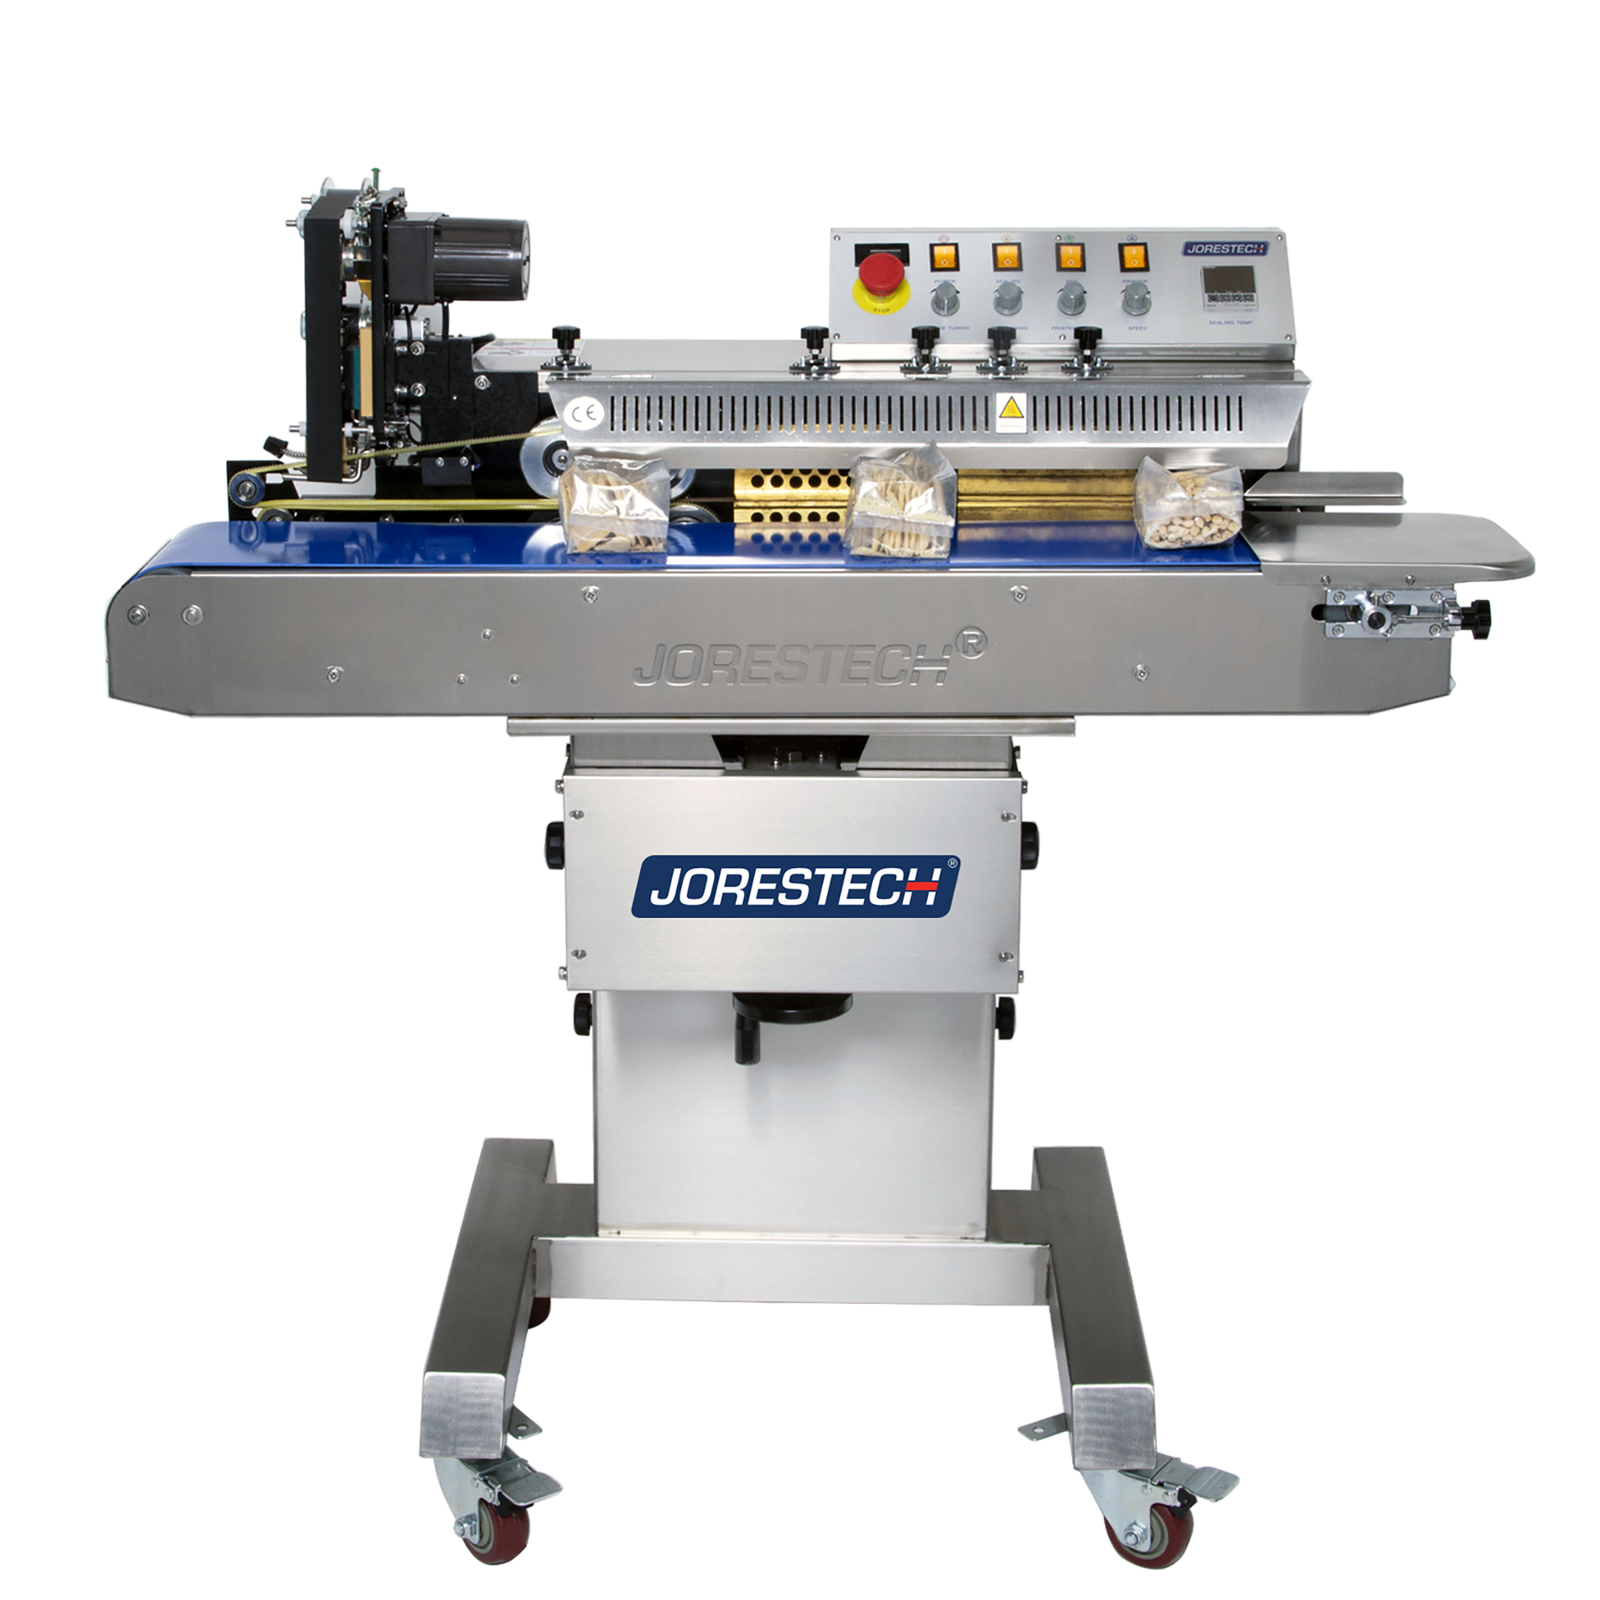 Self standing stainless steel continuous band sealer with coder by JORES TECHNOLOGIES®